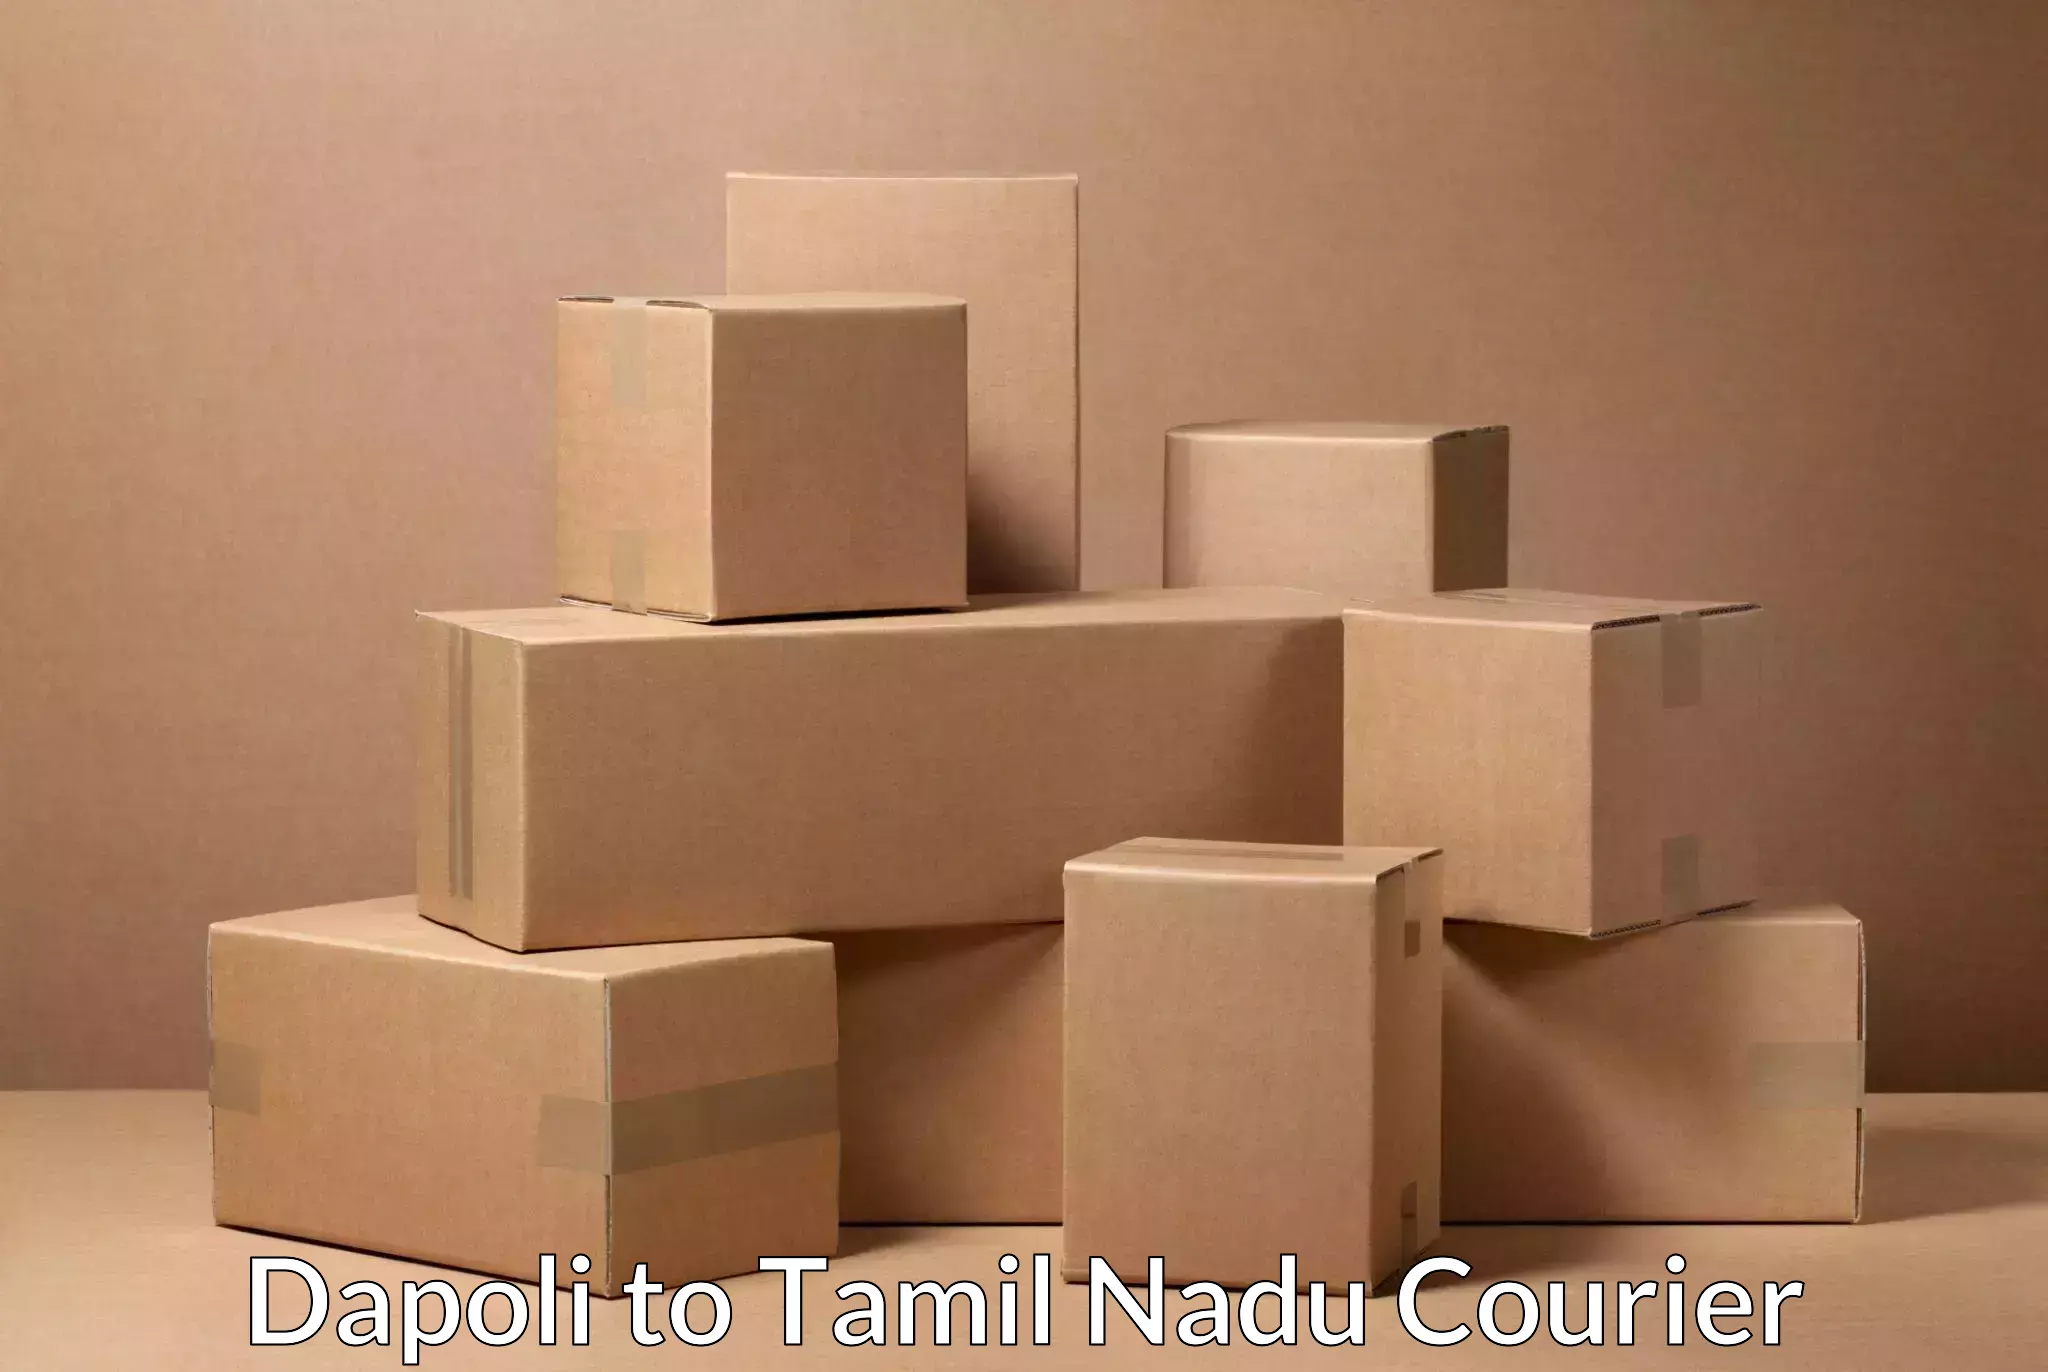 Global courier networks Dapoli to Karur